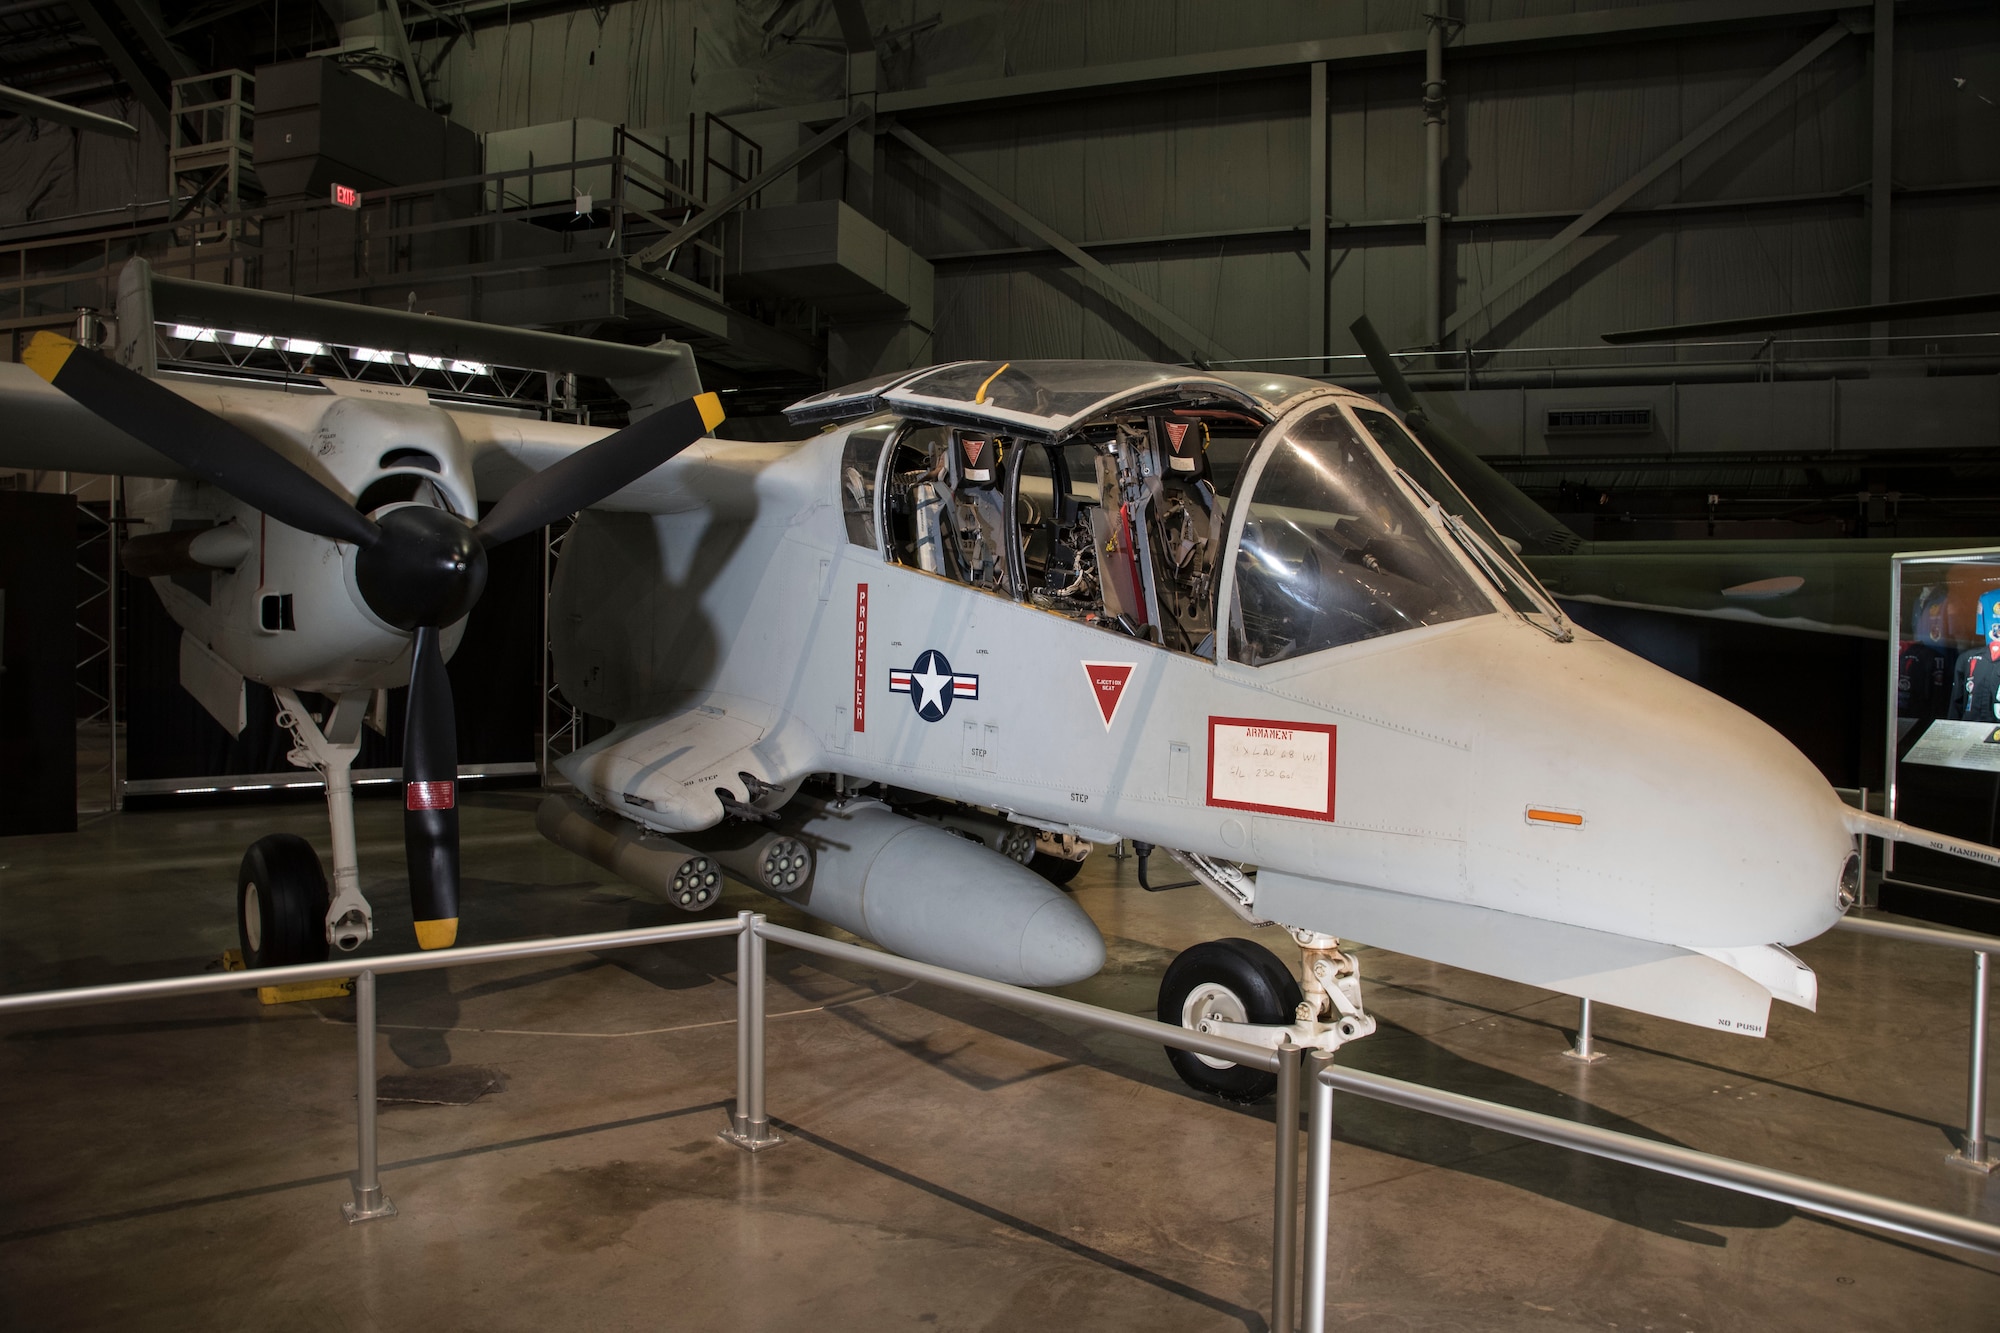 DAYTON, Ohio -- North American Rockwell OV-10A on display in the Southeast Asia War Gallery at the National Museum of the United States Air Force. (U.S. Air Force photo by Ken LaRock)